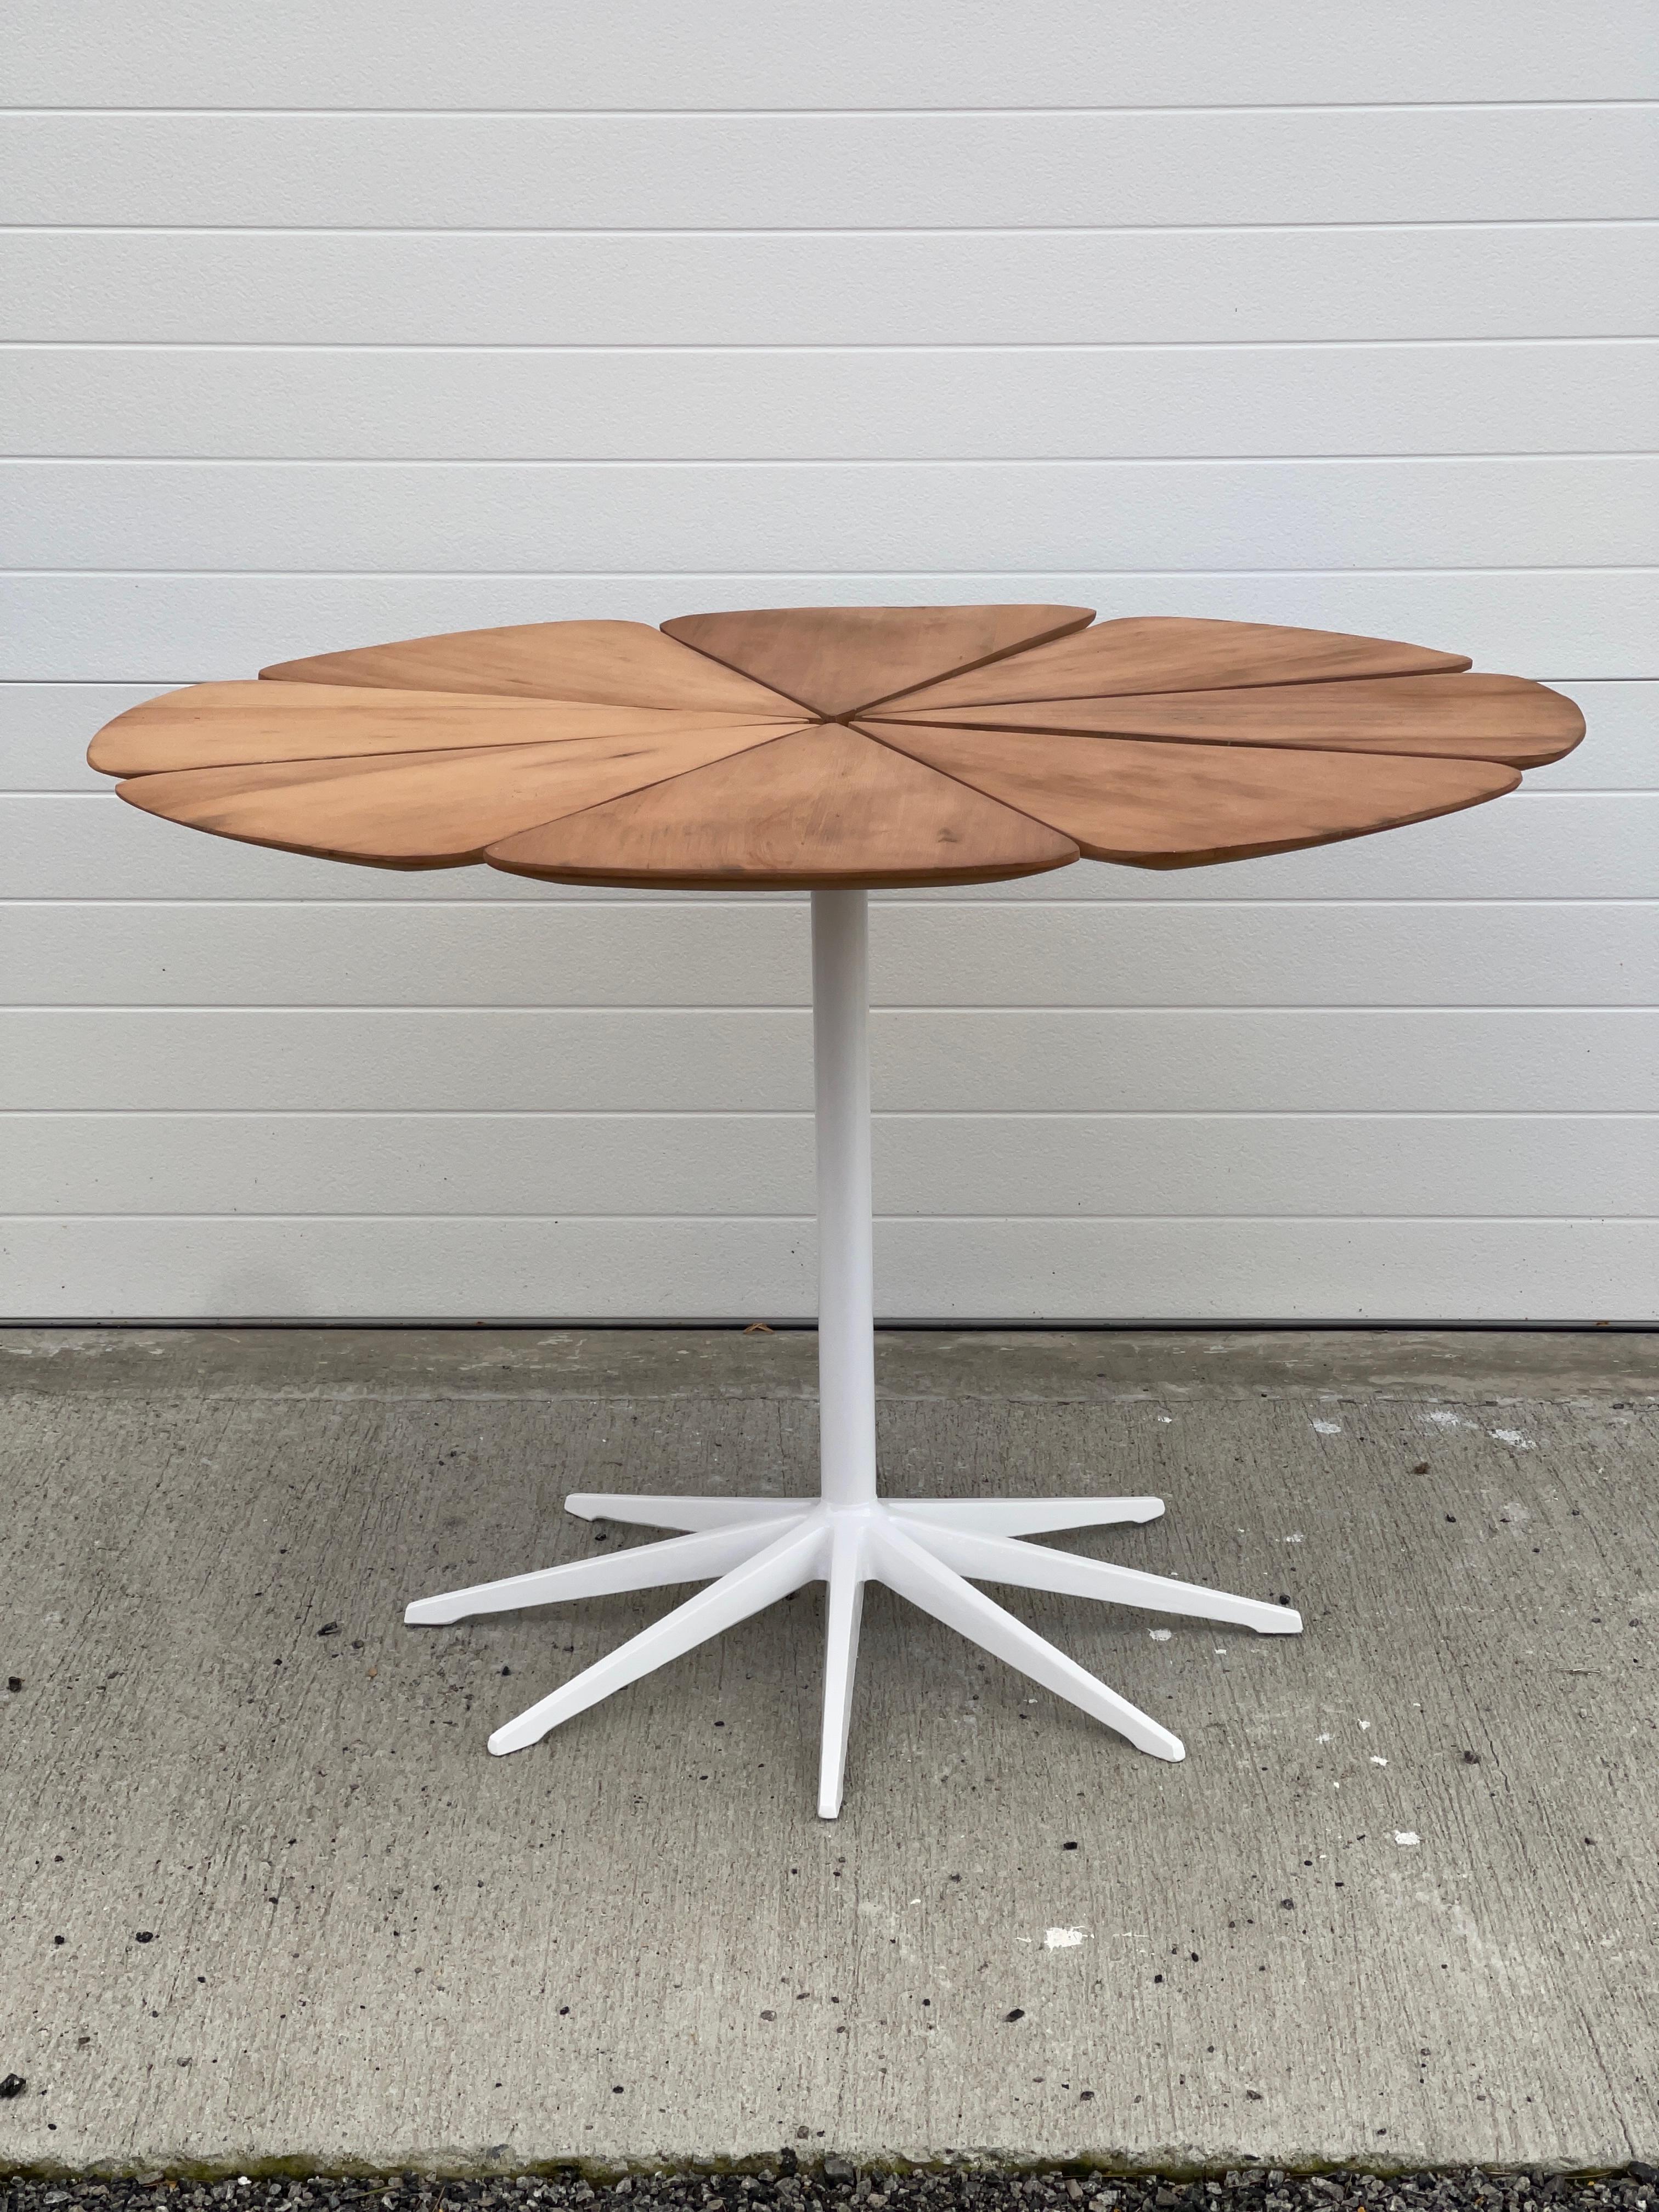 This is one of the earliest editions of the Petal table designed by Richard Schultz and produced by Knoll circa 1961.
It was supplied from Knoll with the petal tops painted white (see last photo) but the underlying wood is California Redwood. (Later